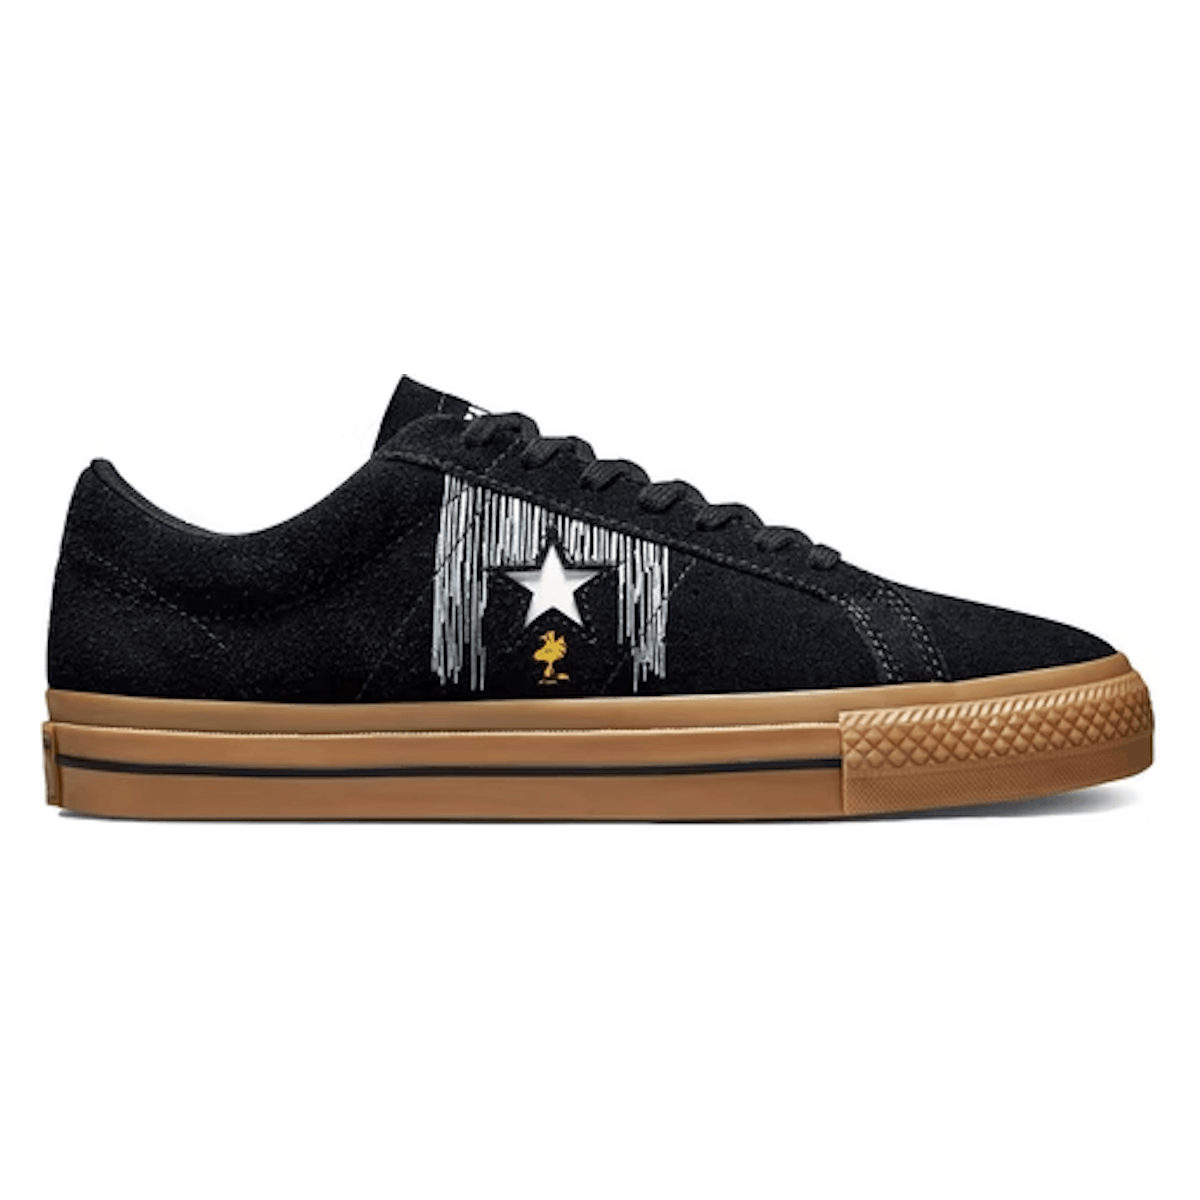 Converse One Star Ox "Peanuts Snoopy and Woodstock"